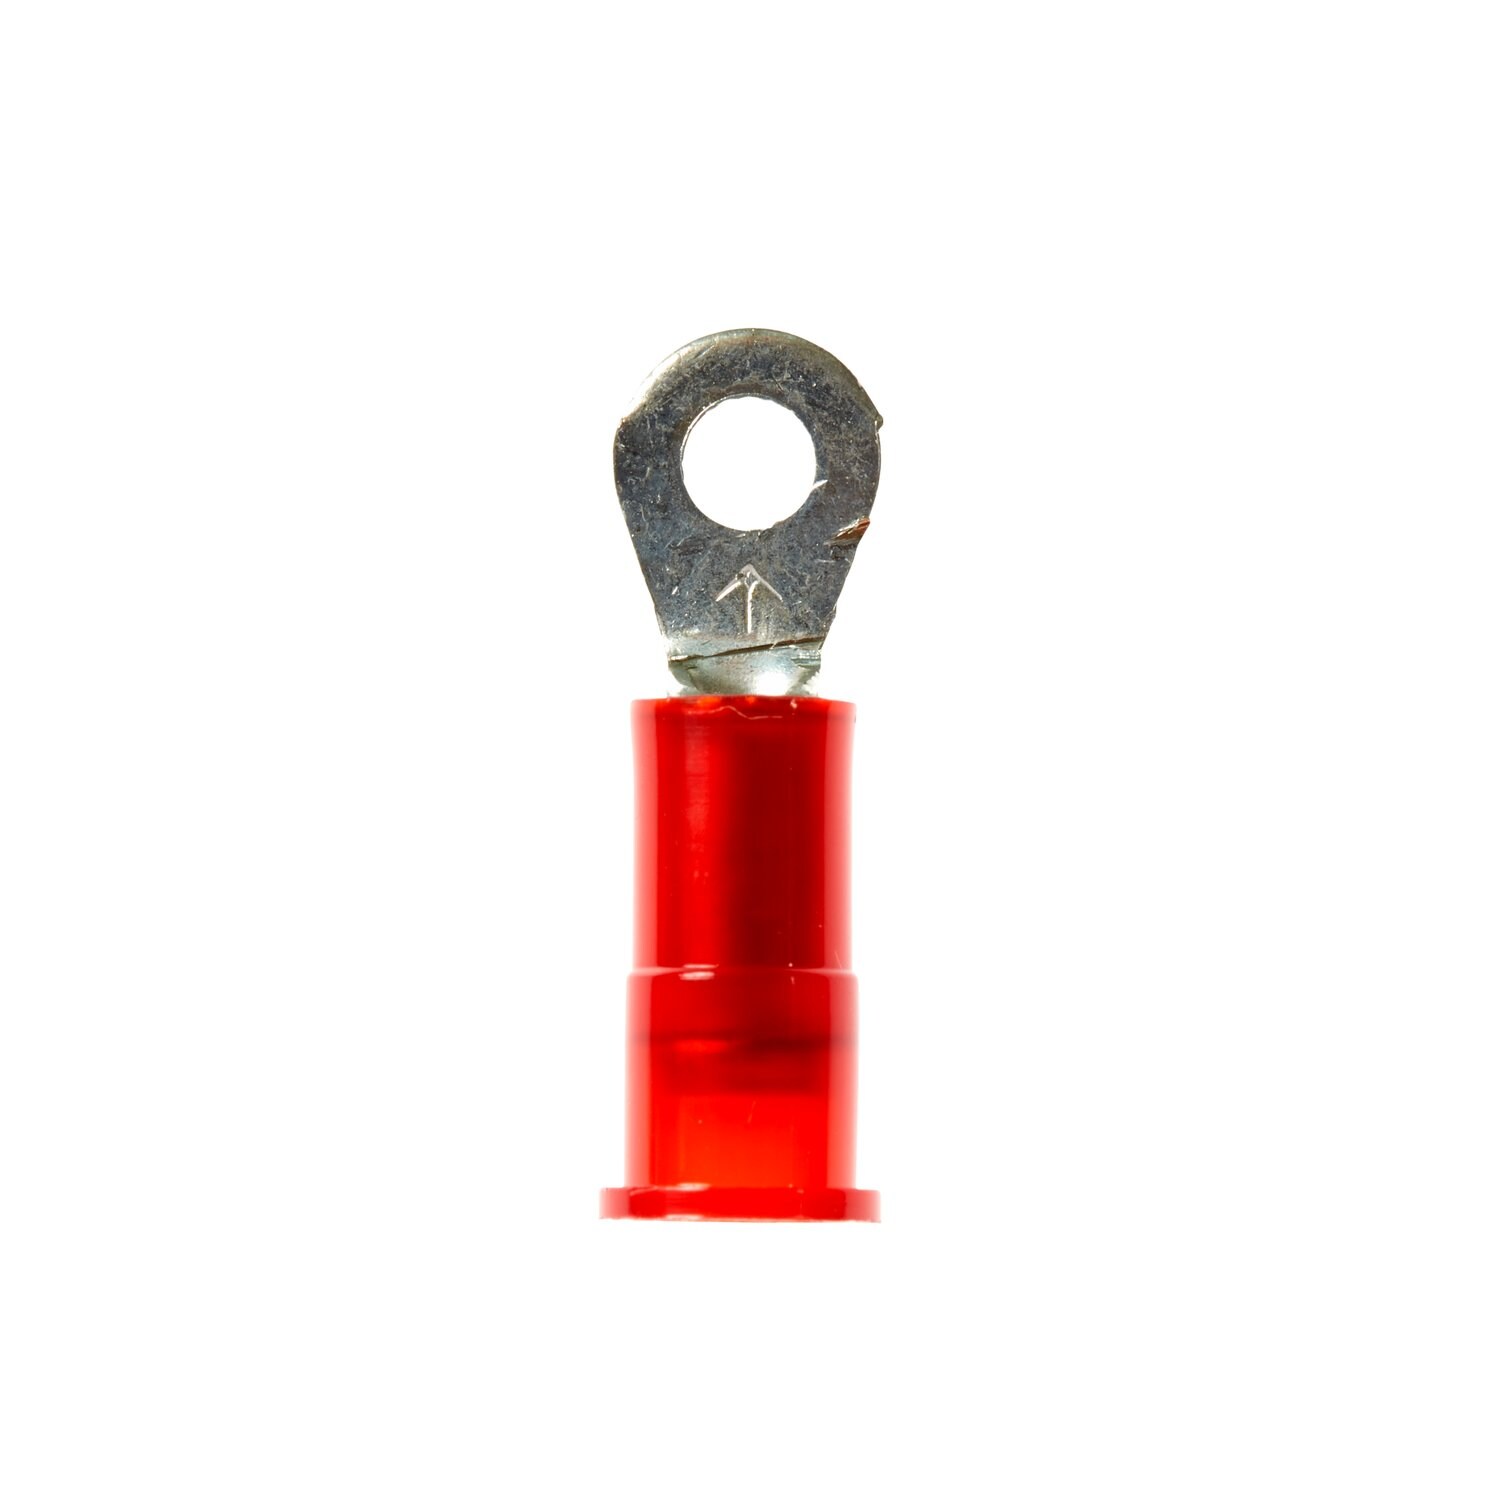 7100163926 - 3M Scotchlok Ring Tongue, Nylon Insulated w/Insulation Grip
MNG18-4R/SK, Stud Size 4, 1000/Case